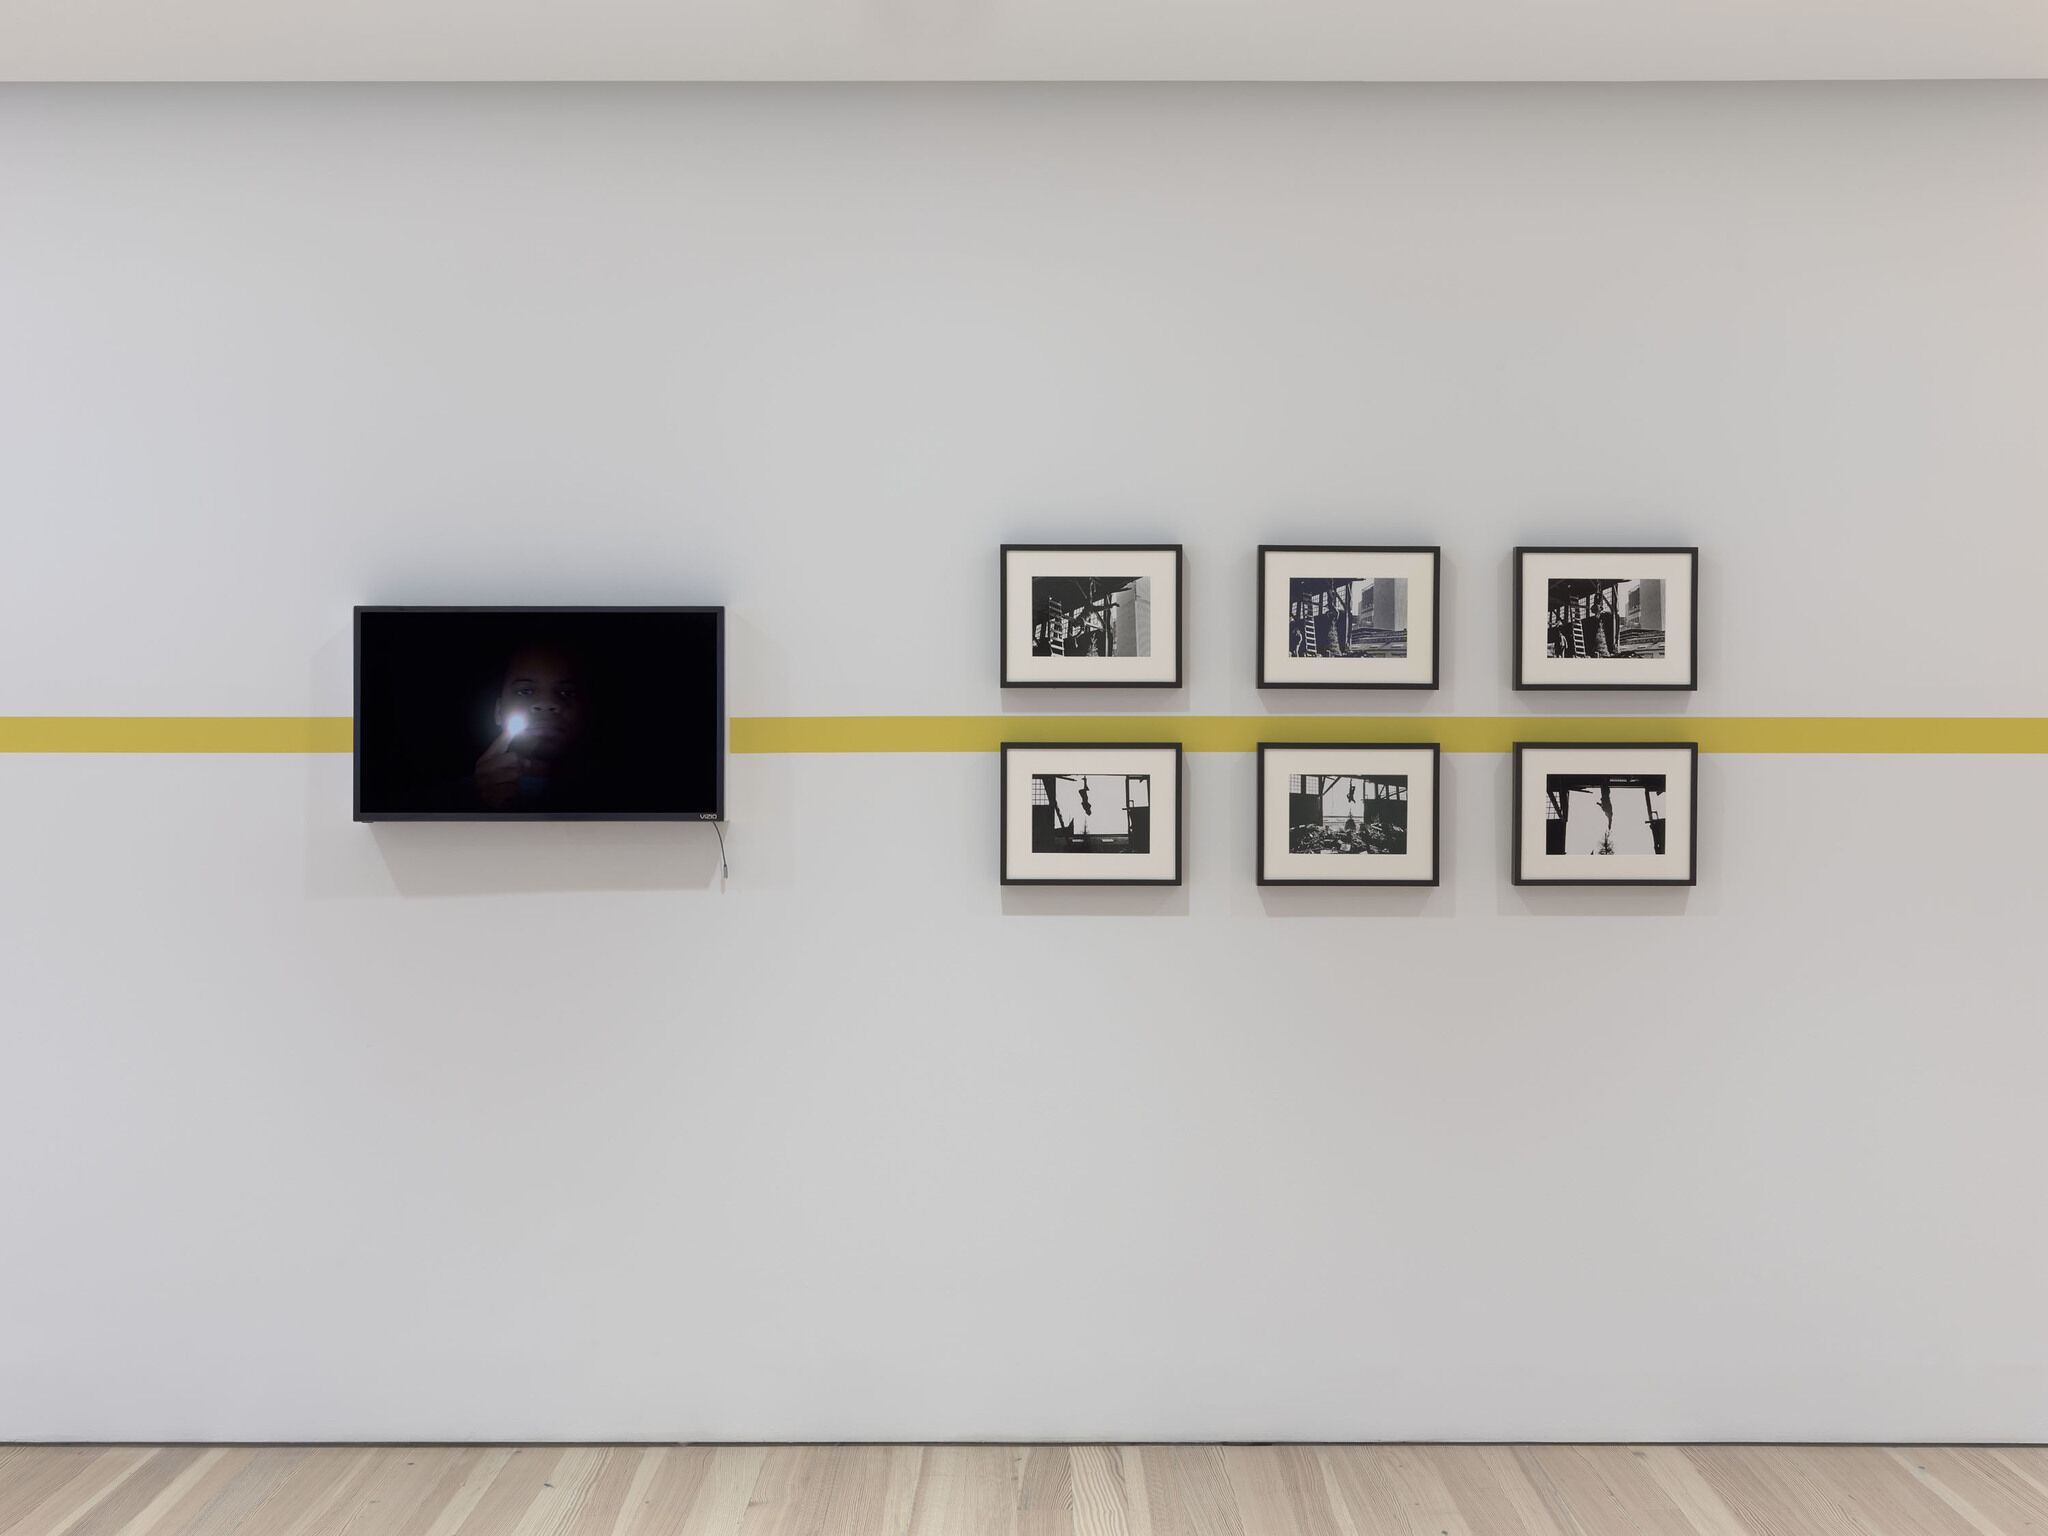 A black screen and a series of six framed photographs are mounted against a white exhibition wall.